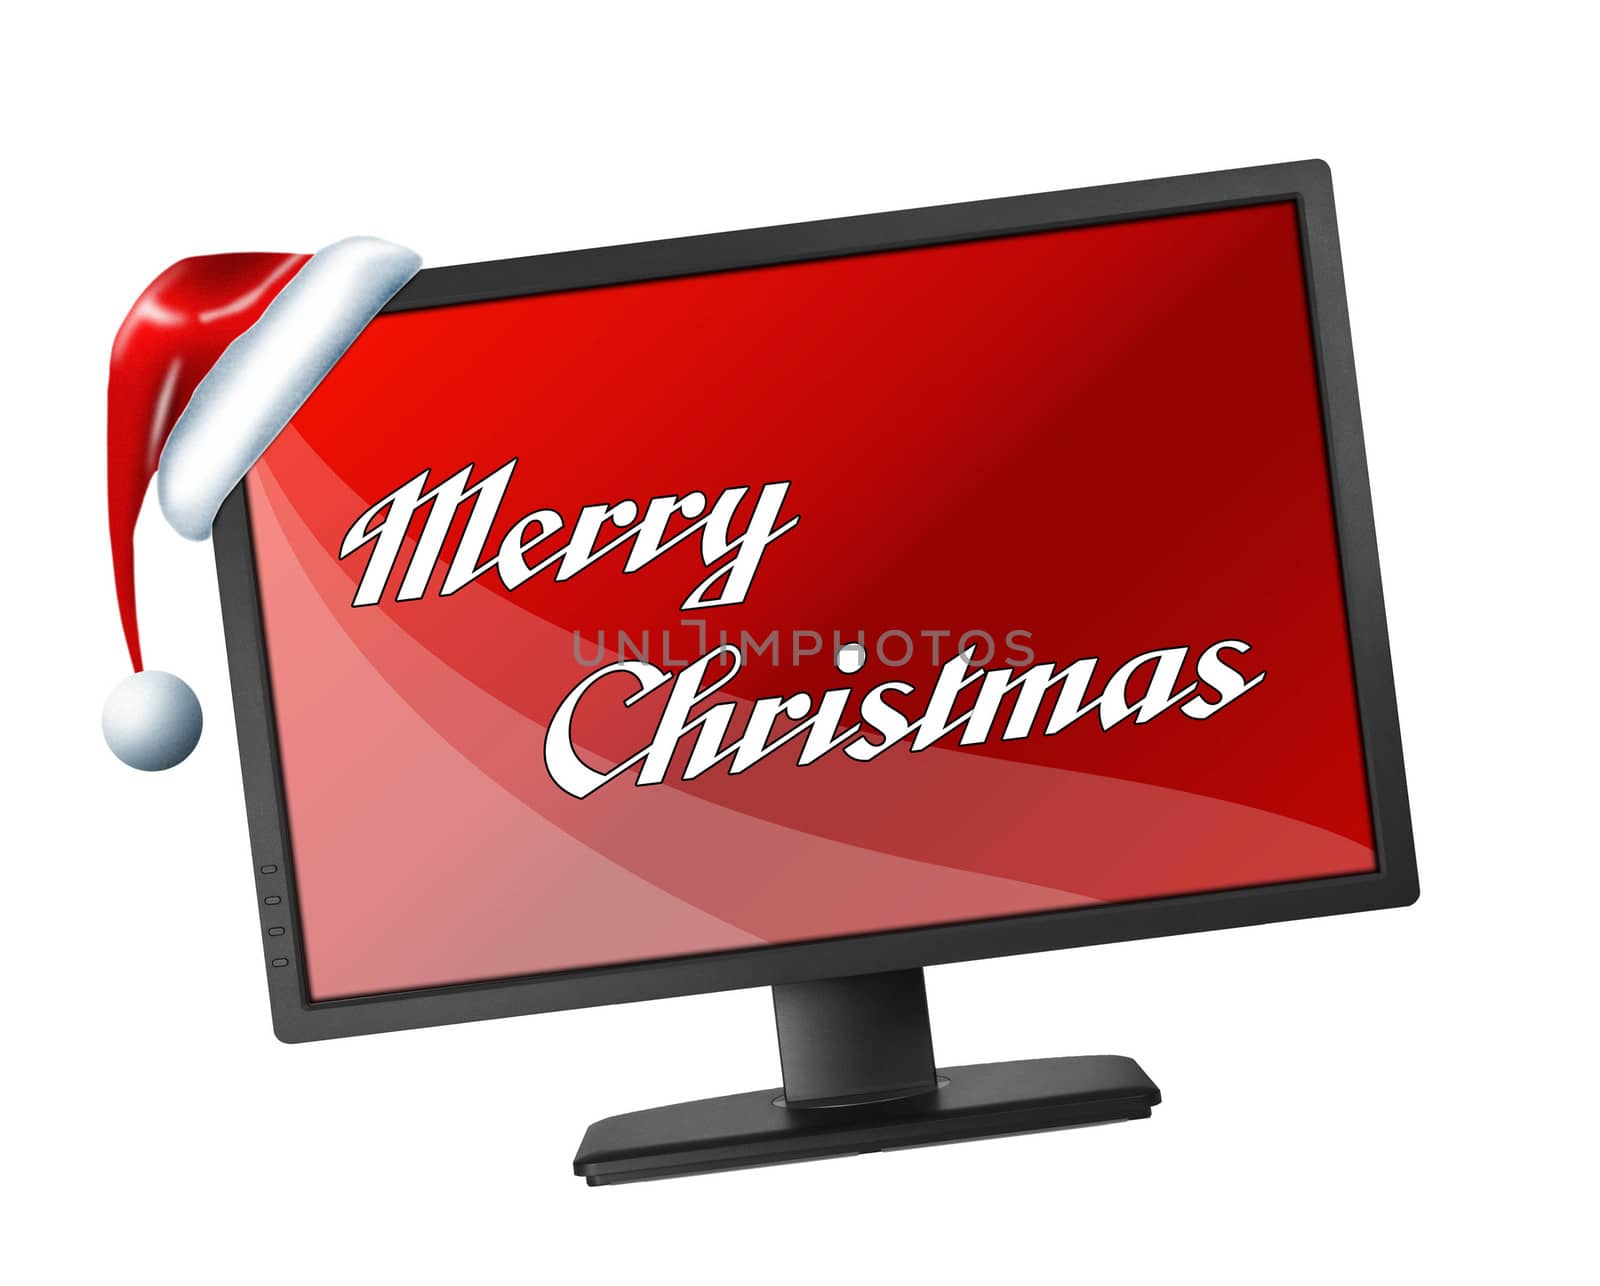 Monitor with red screen and Merry Christmas text